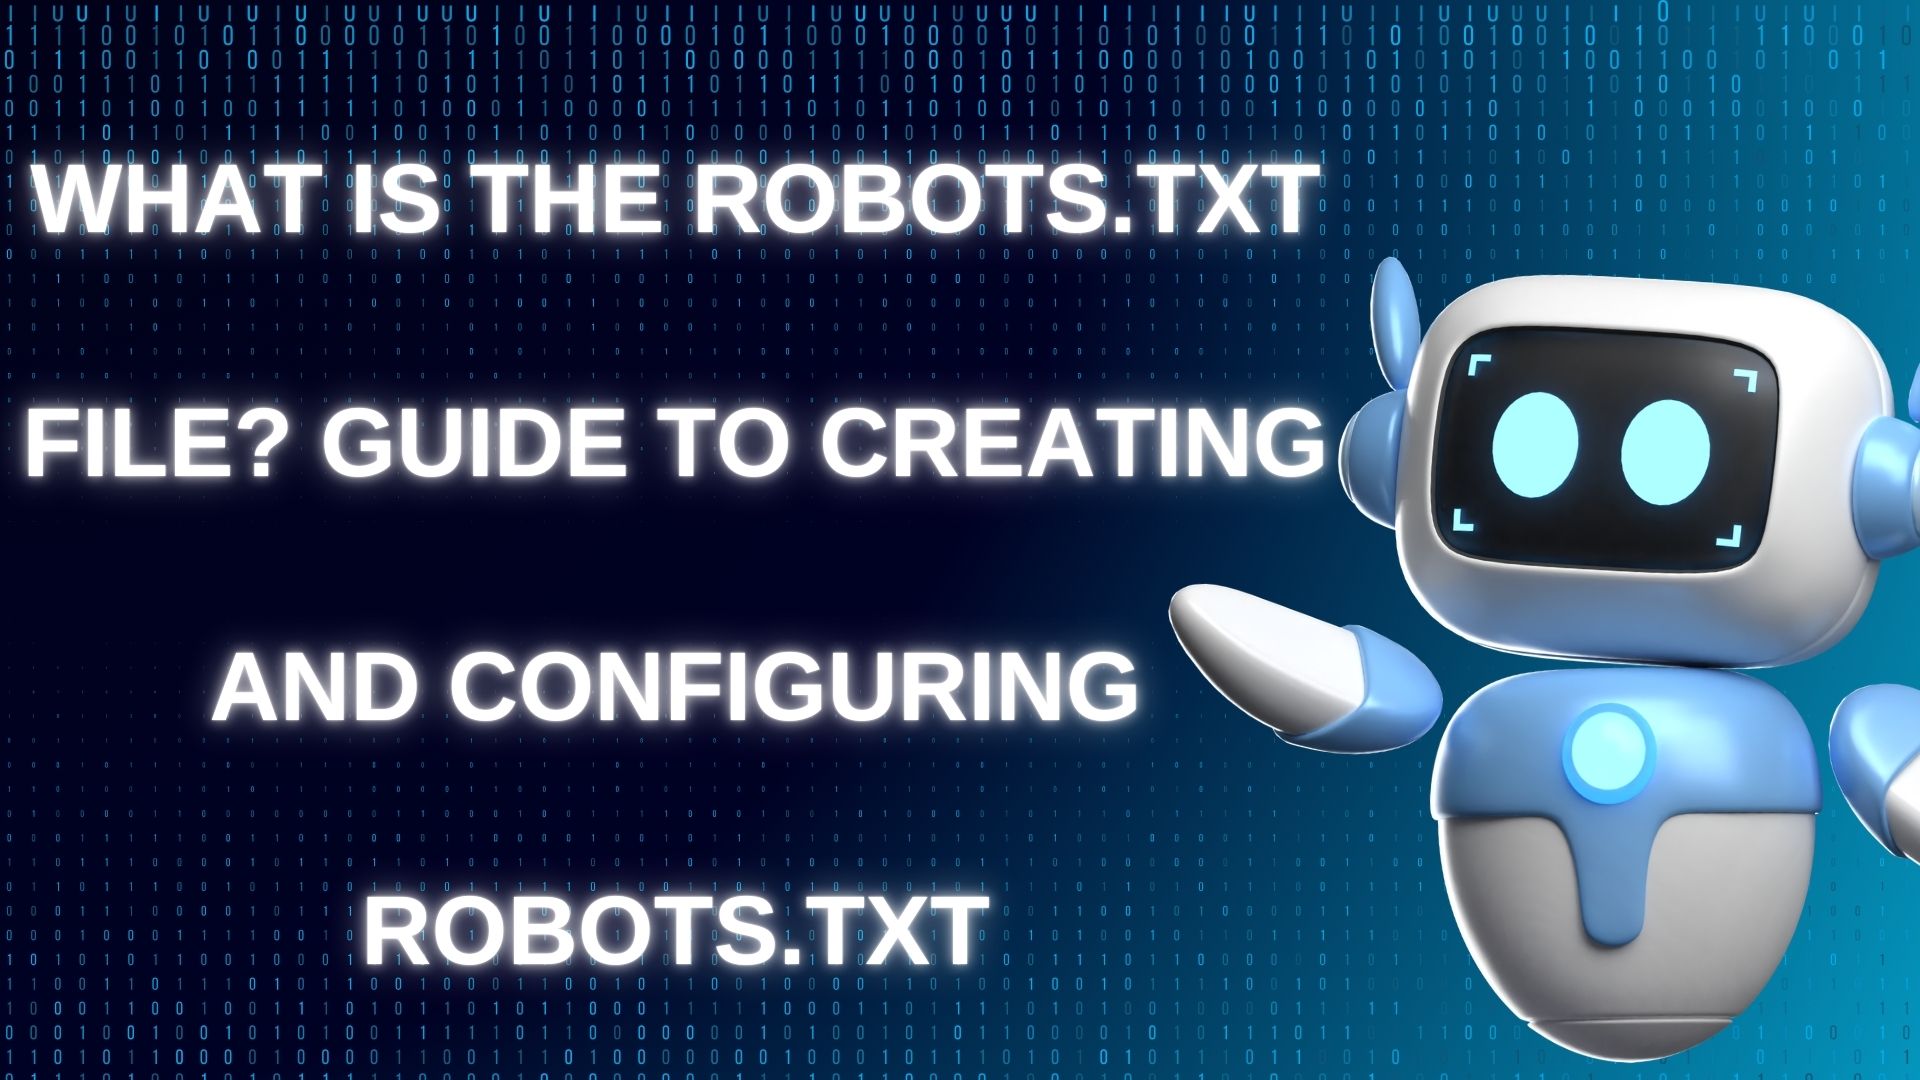 What is the Robots.txt file? Guide to creating and configuring Robots.txt